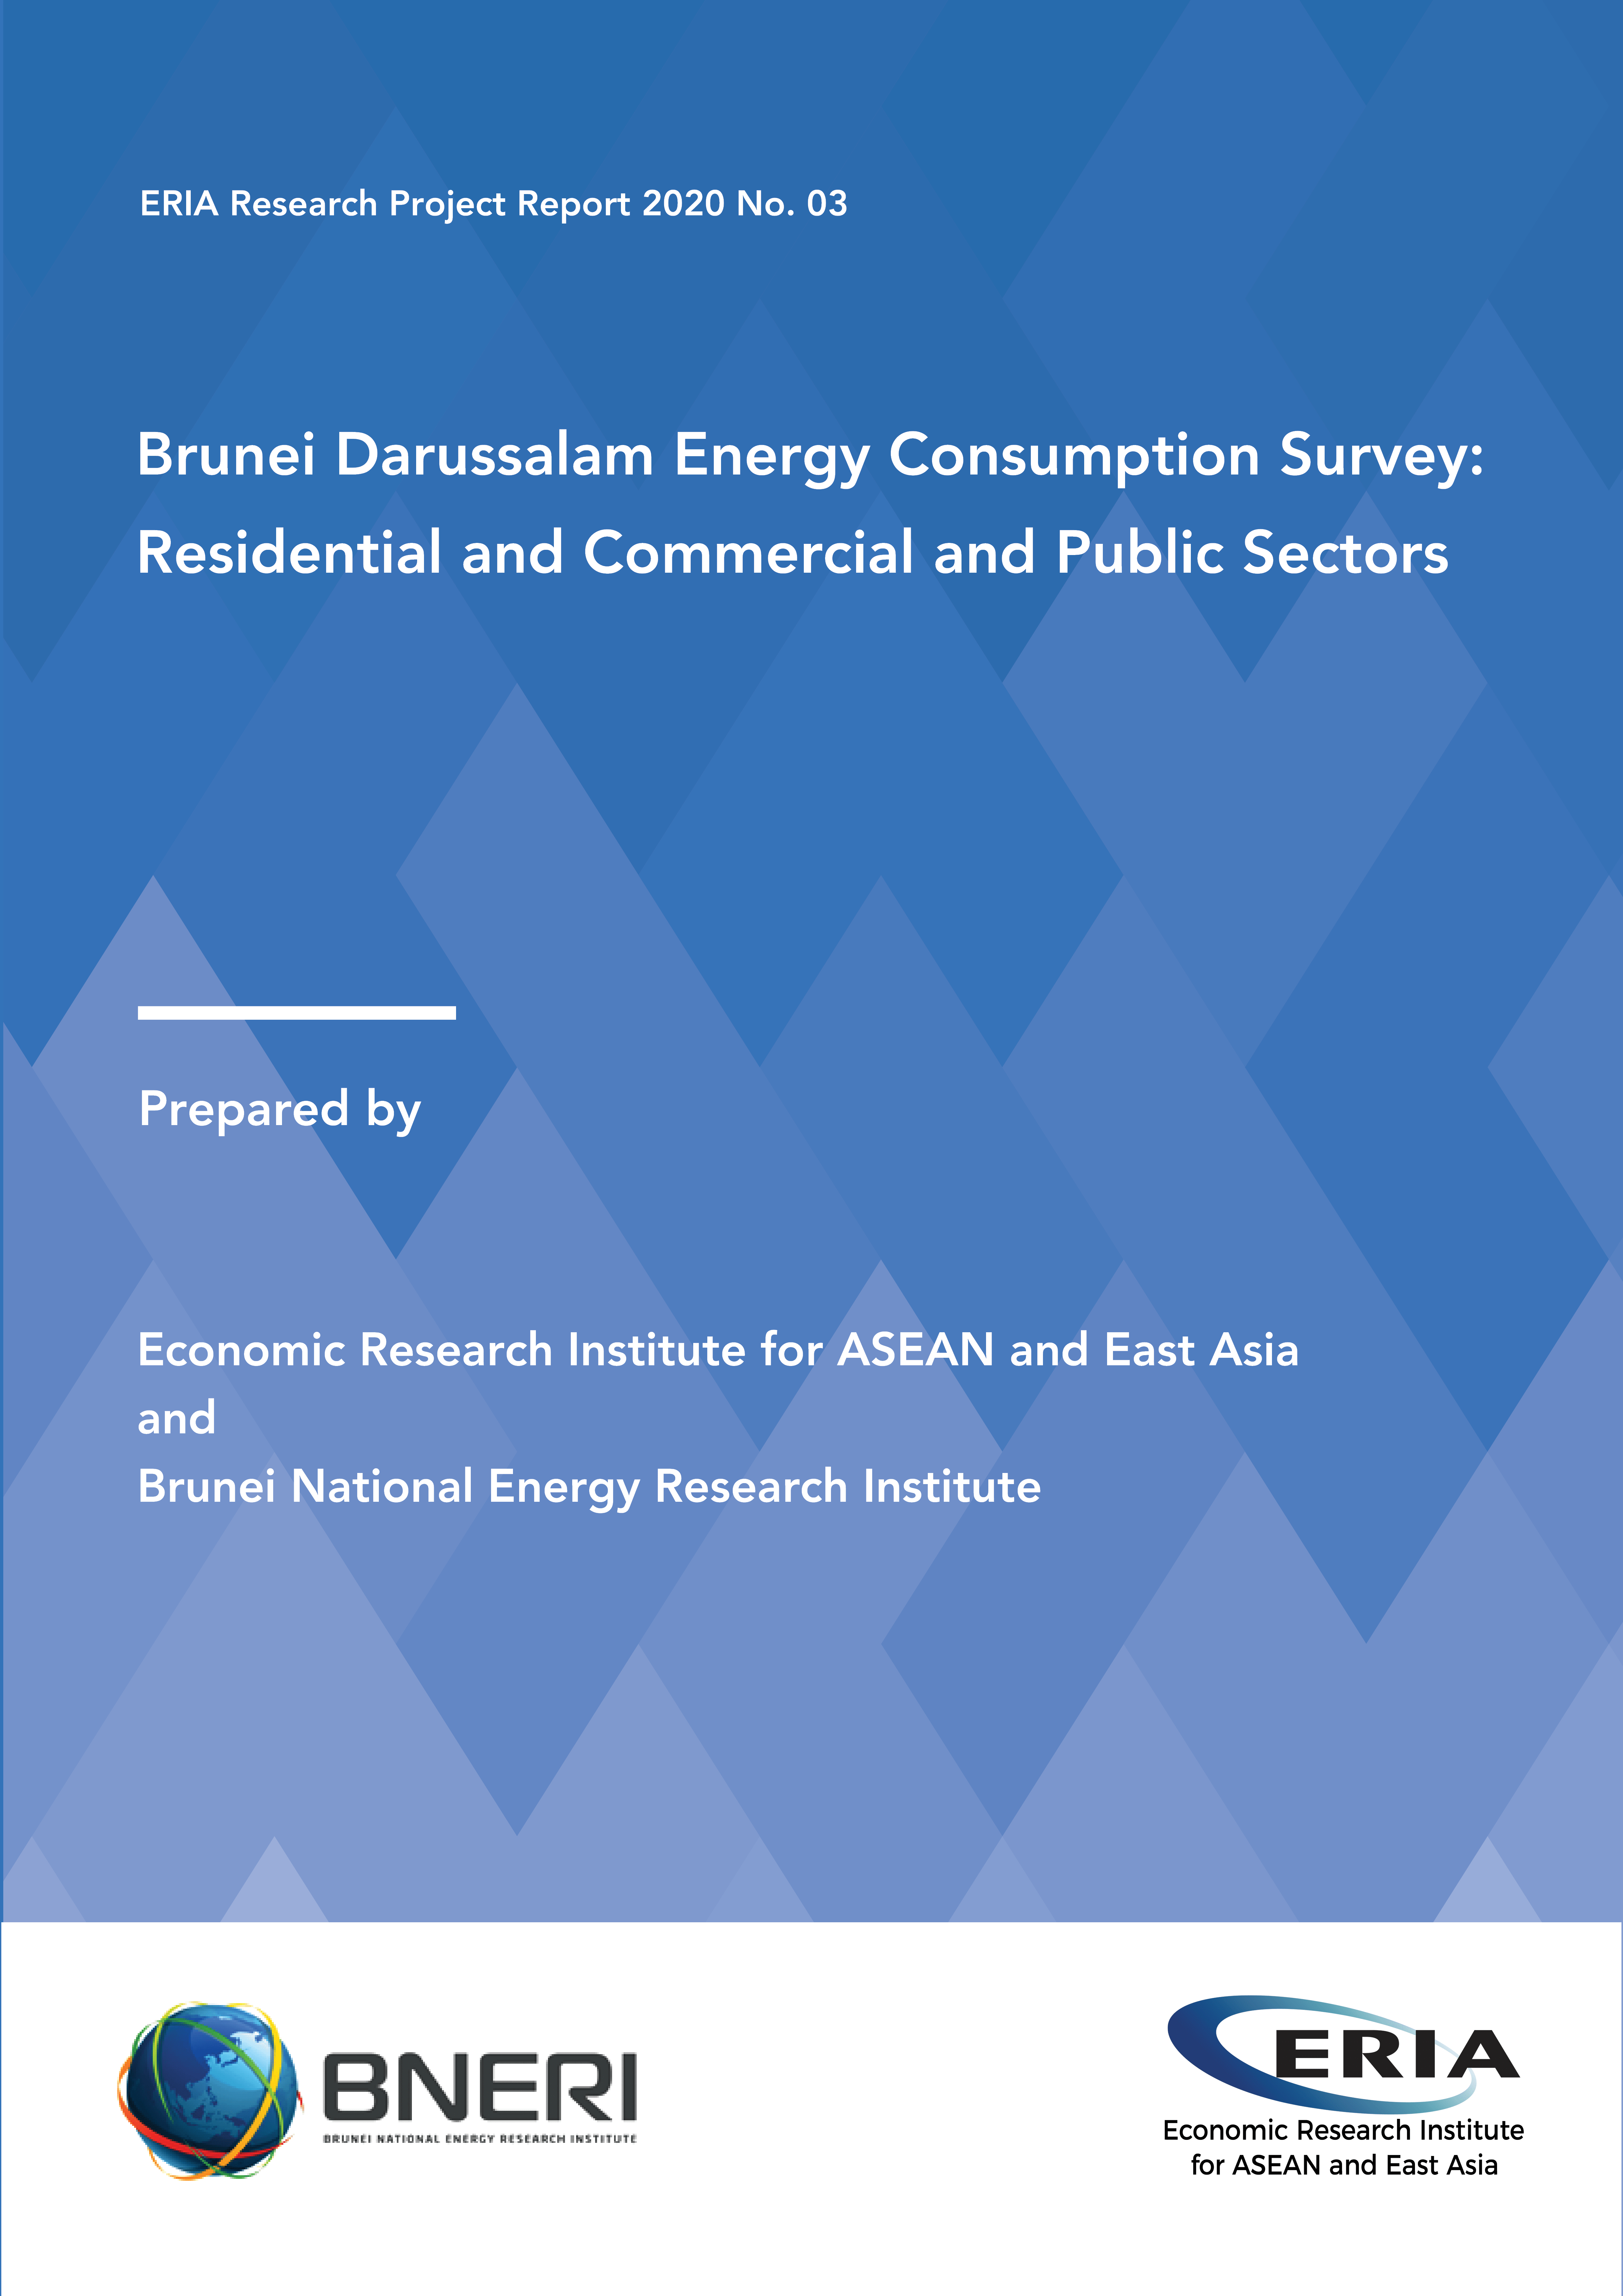 Brunei Darussalam Energy Consumption Survey: Residential and Commercial and Public Sectors